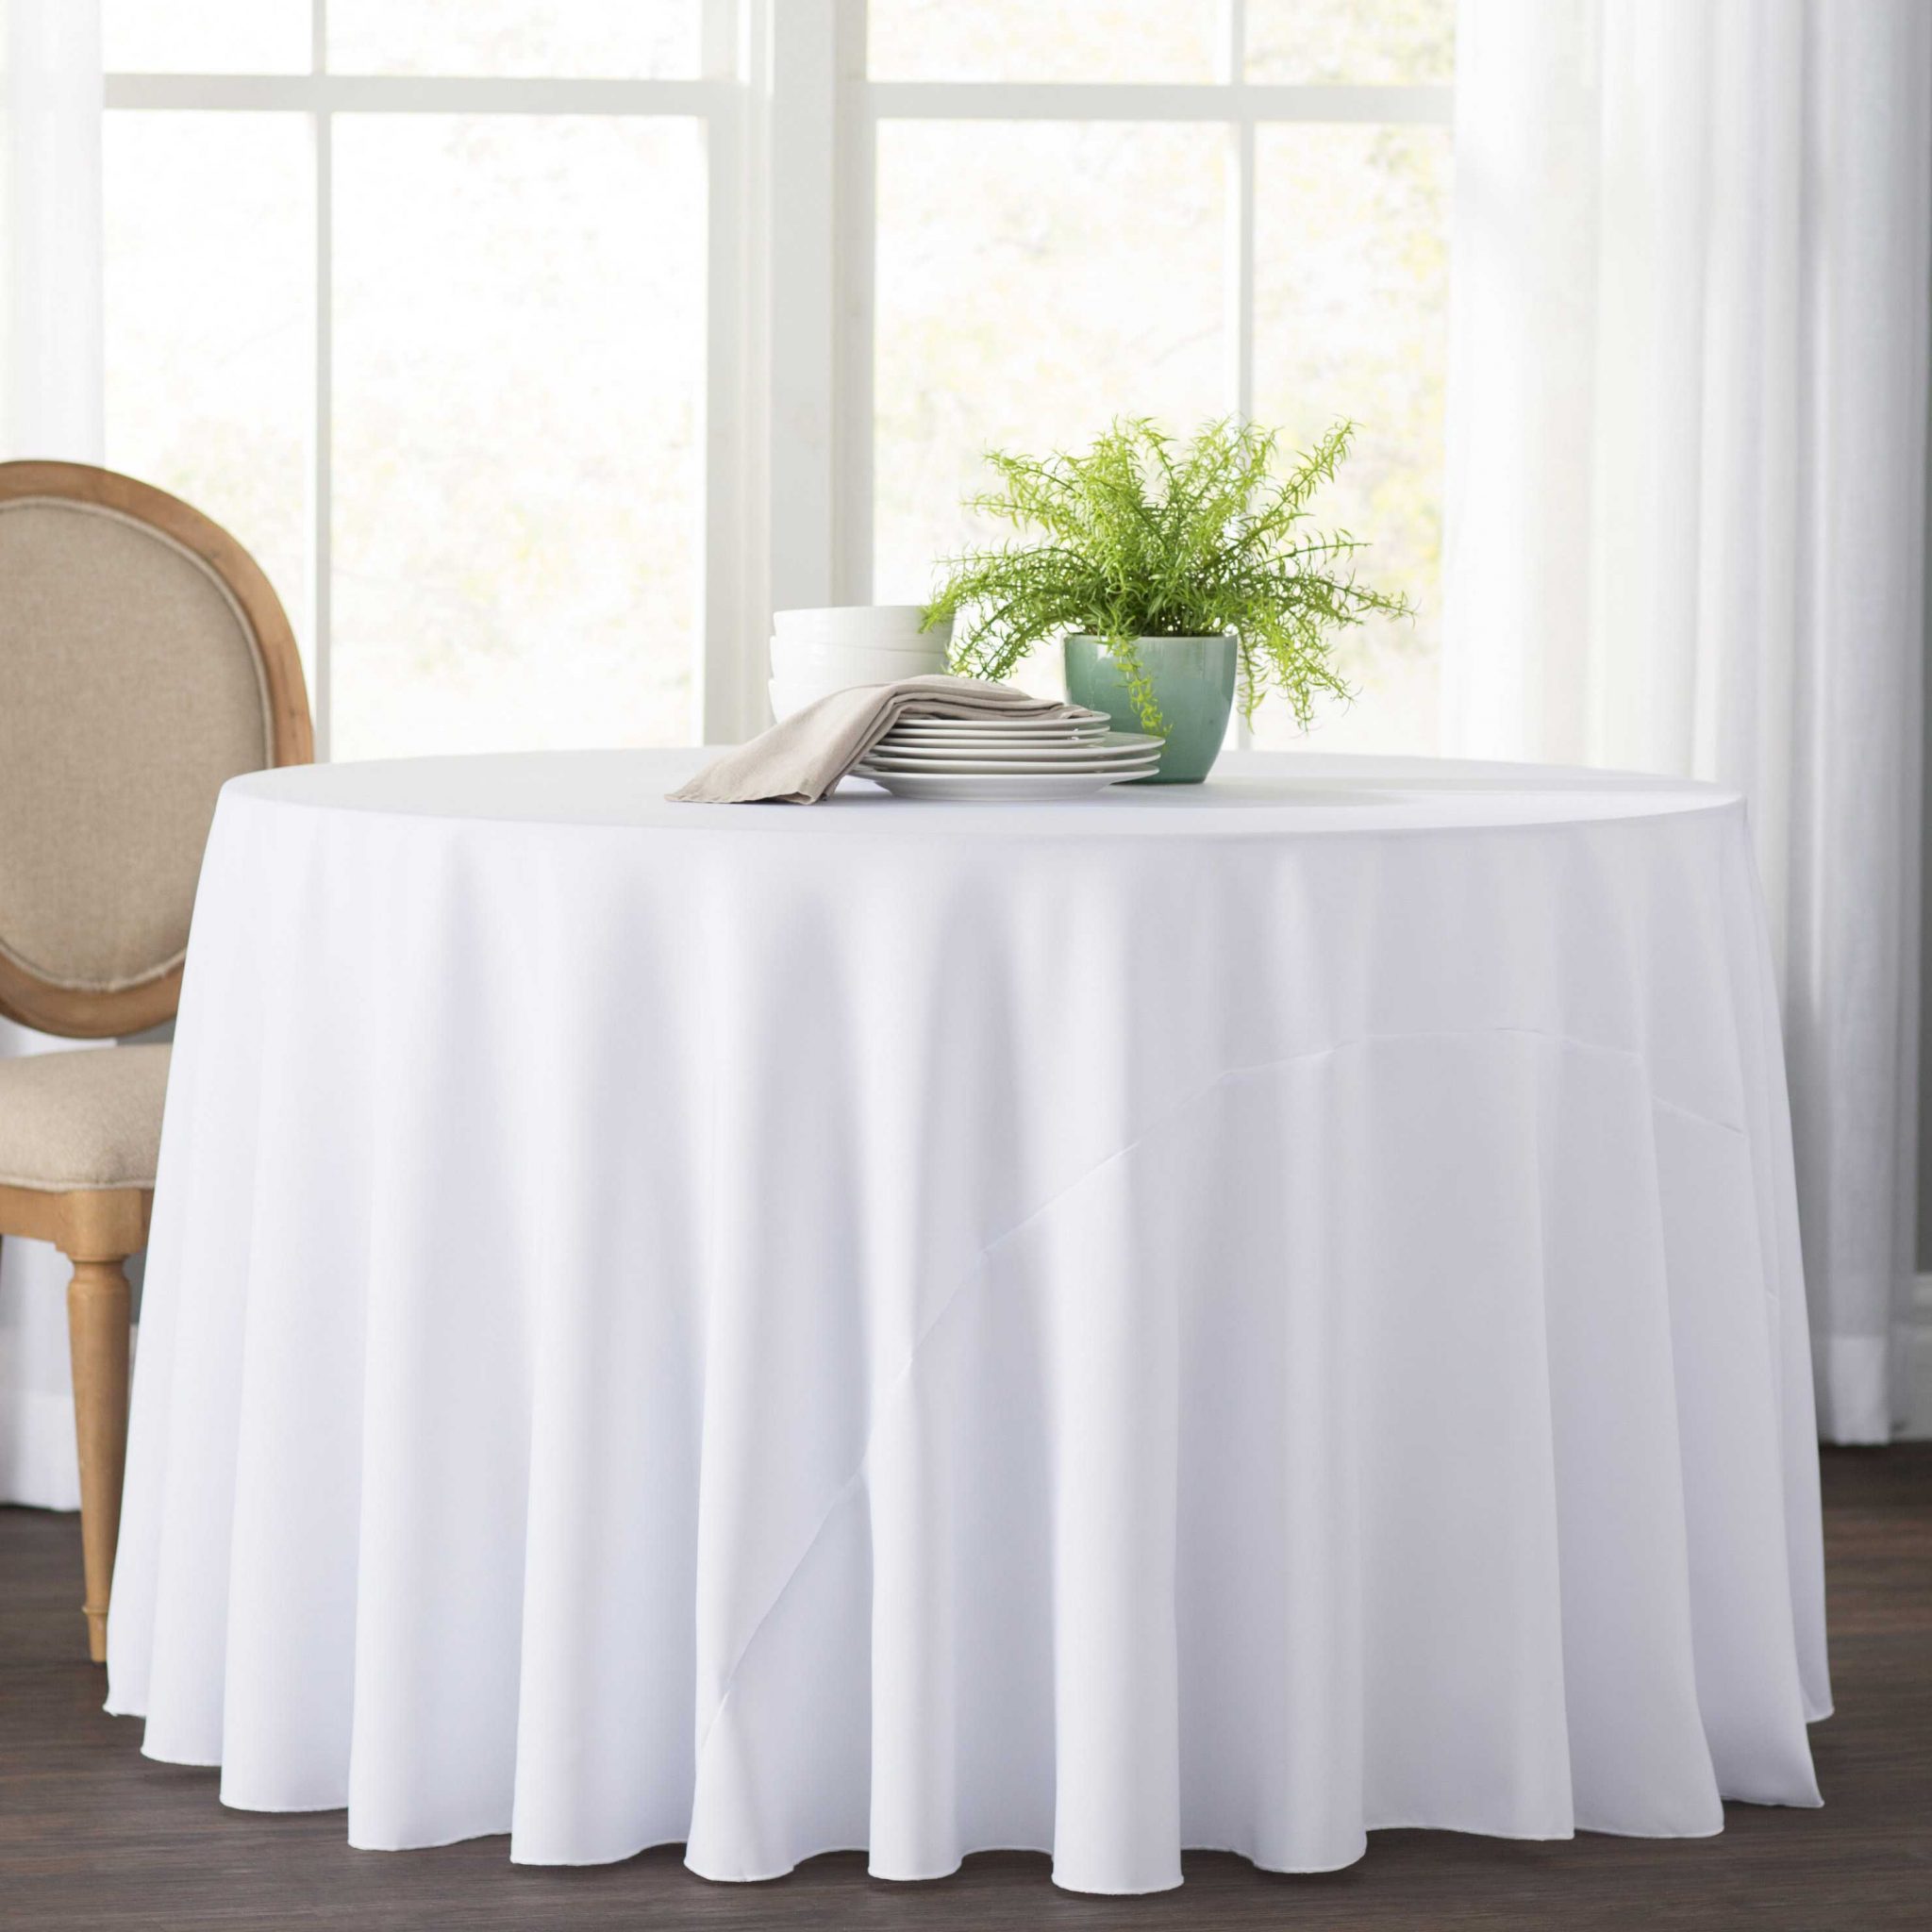 How Are Round Tablecloths Measured